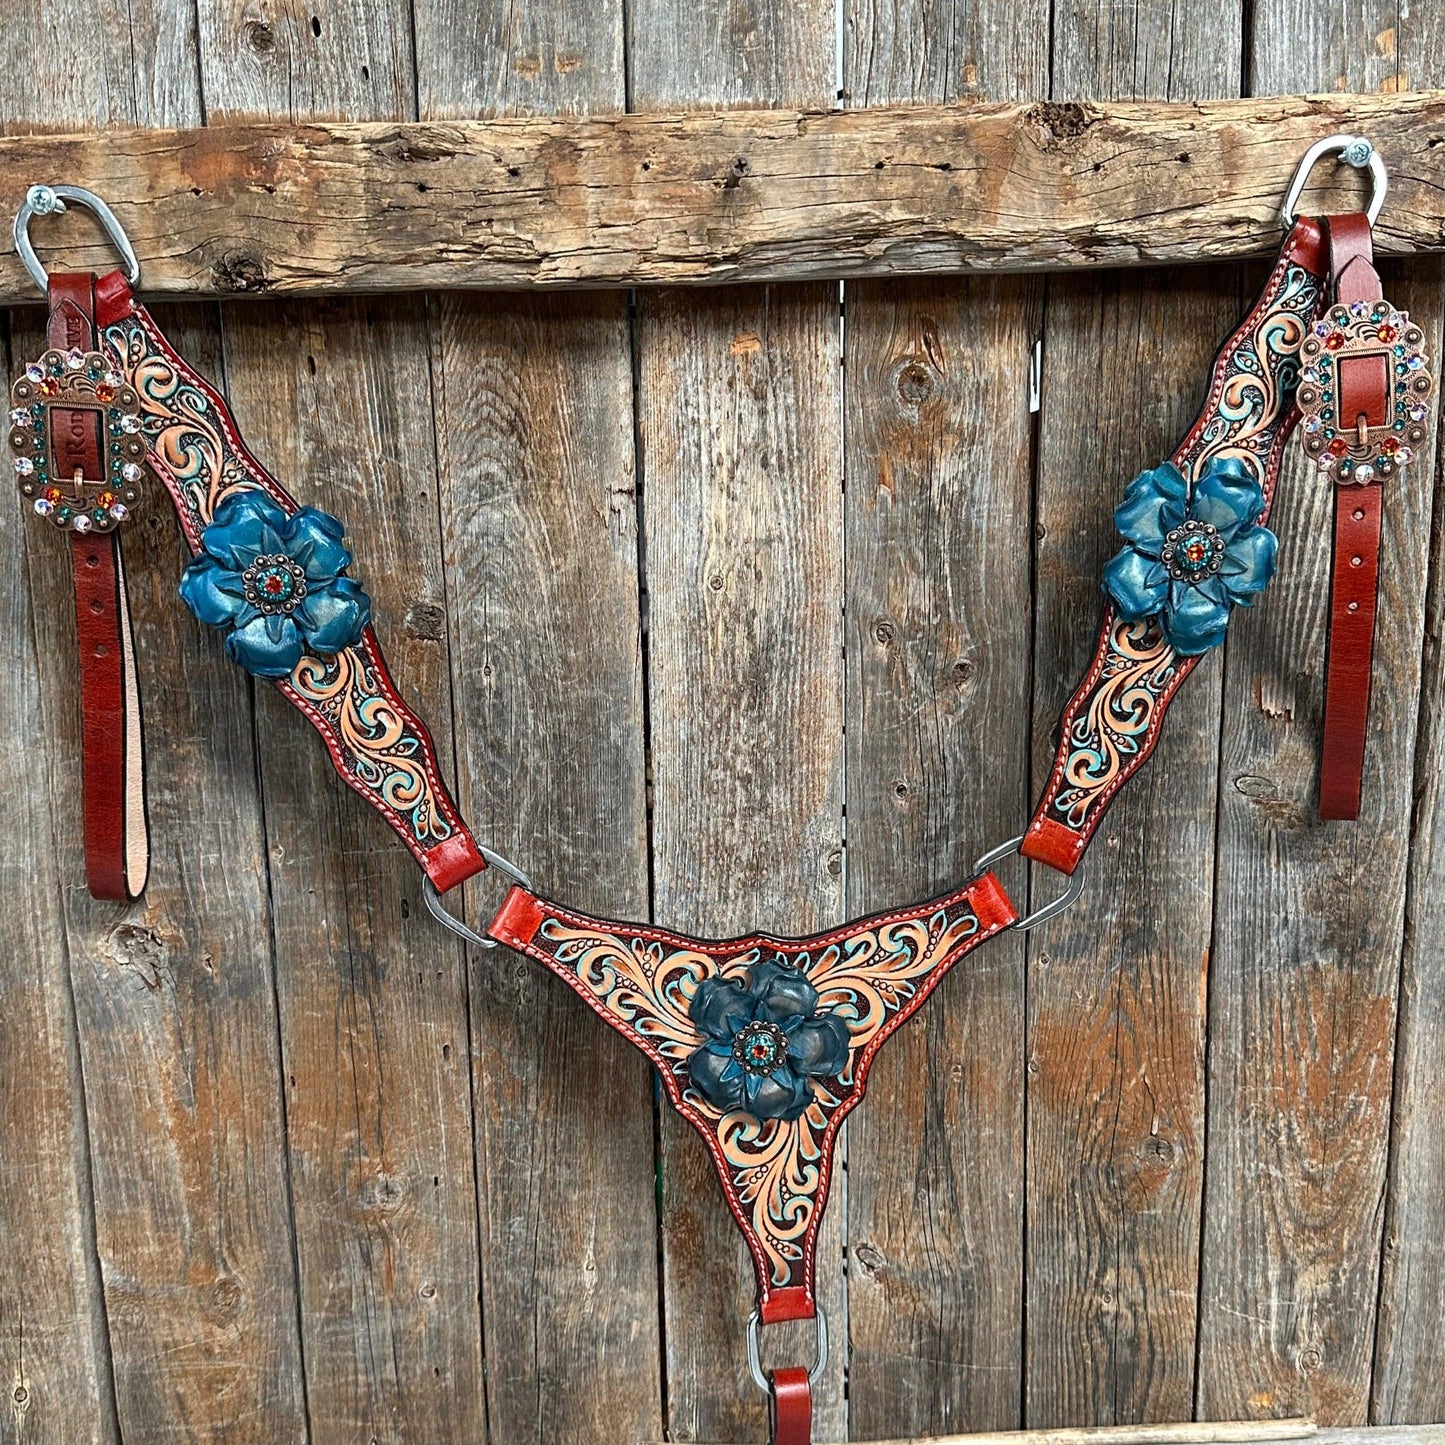 Rust Triangle Turquoise Flower One Ear/ Breastcollar #OEBC533 - RODEO DRIVE